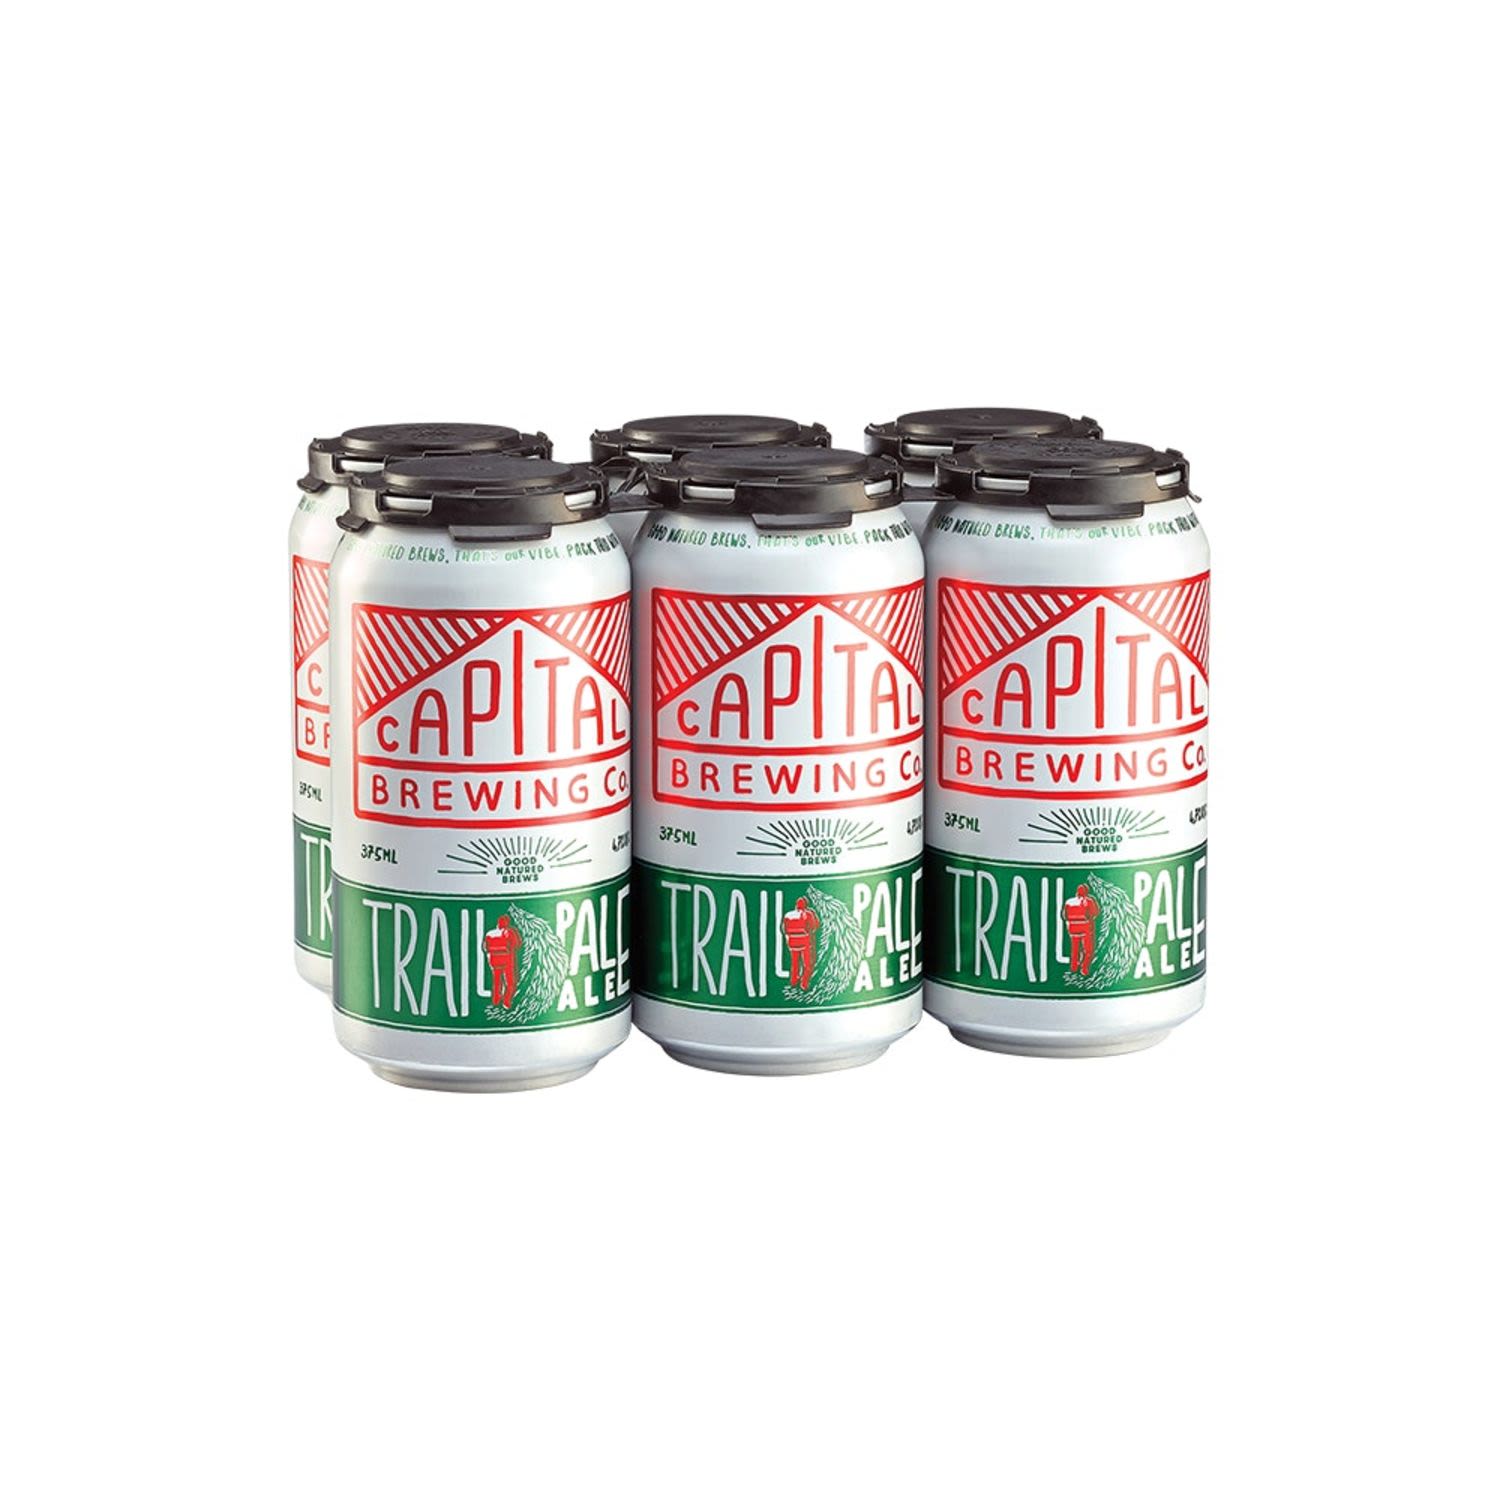 Capital Brewing Co Trail Pale Ale Can 375mL 6 Pack